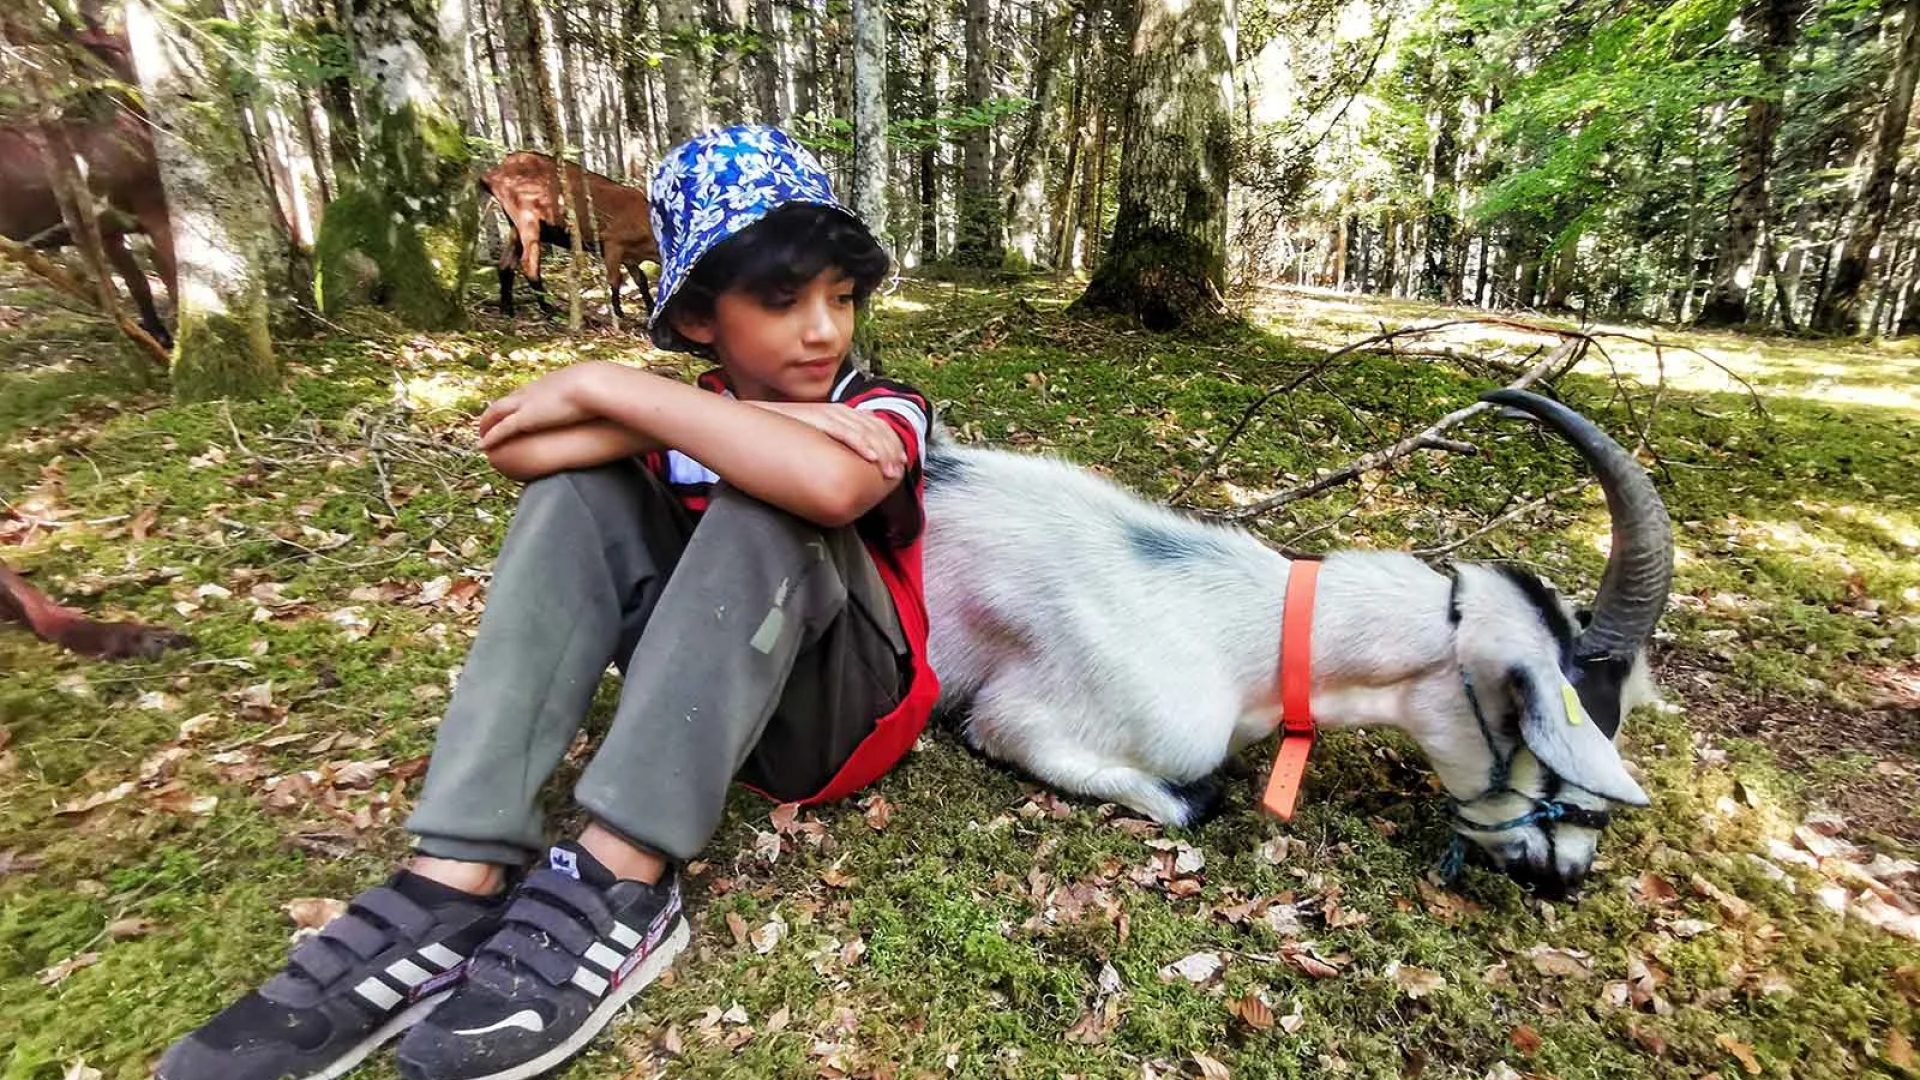 Child sitting next to a goat in the forest in Haute-Loire, Auvergne